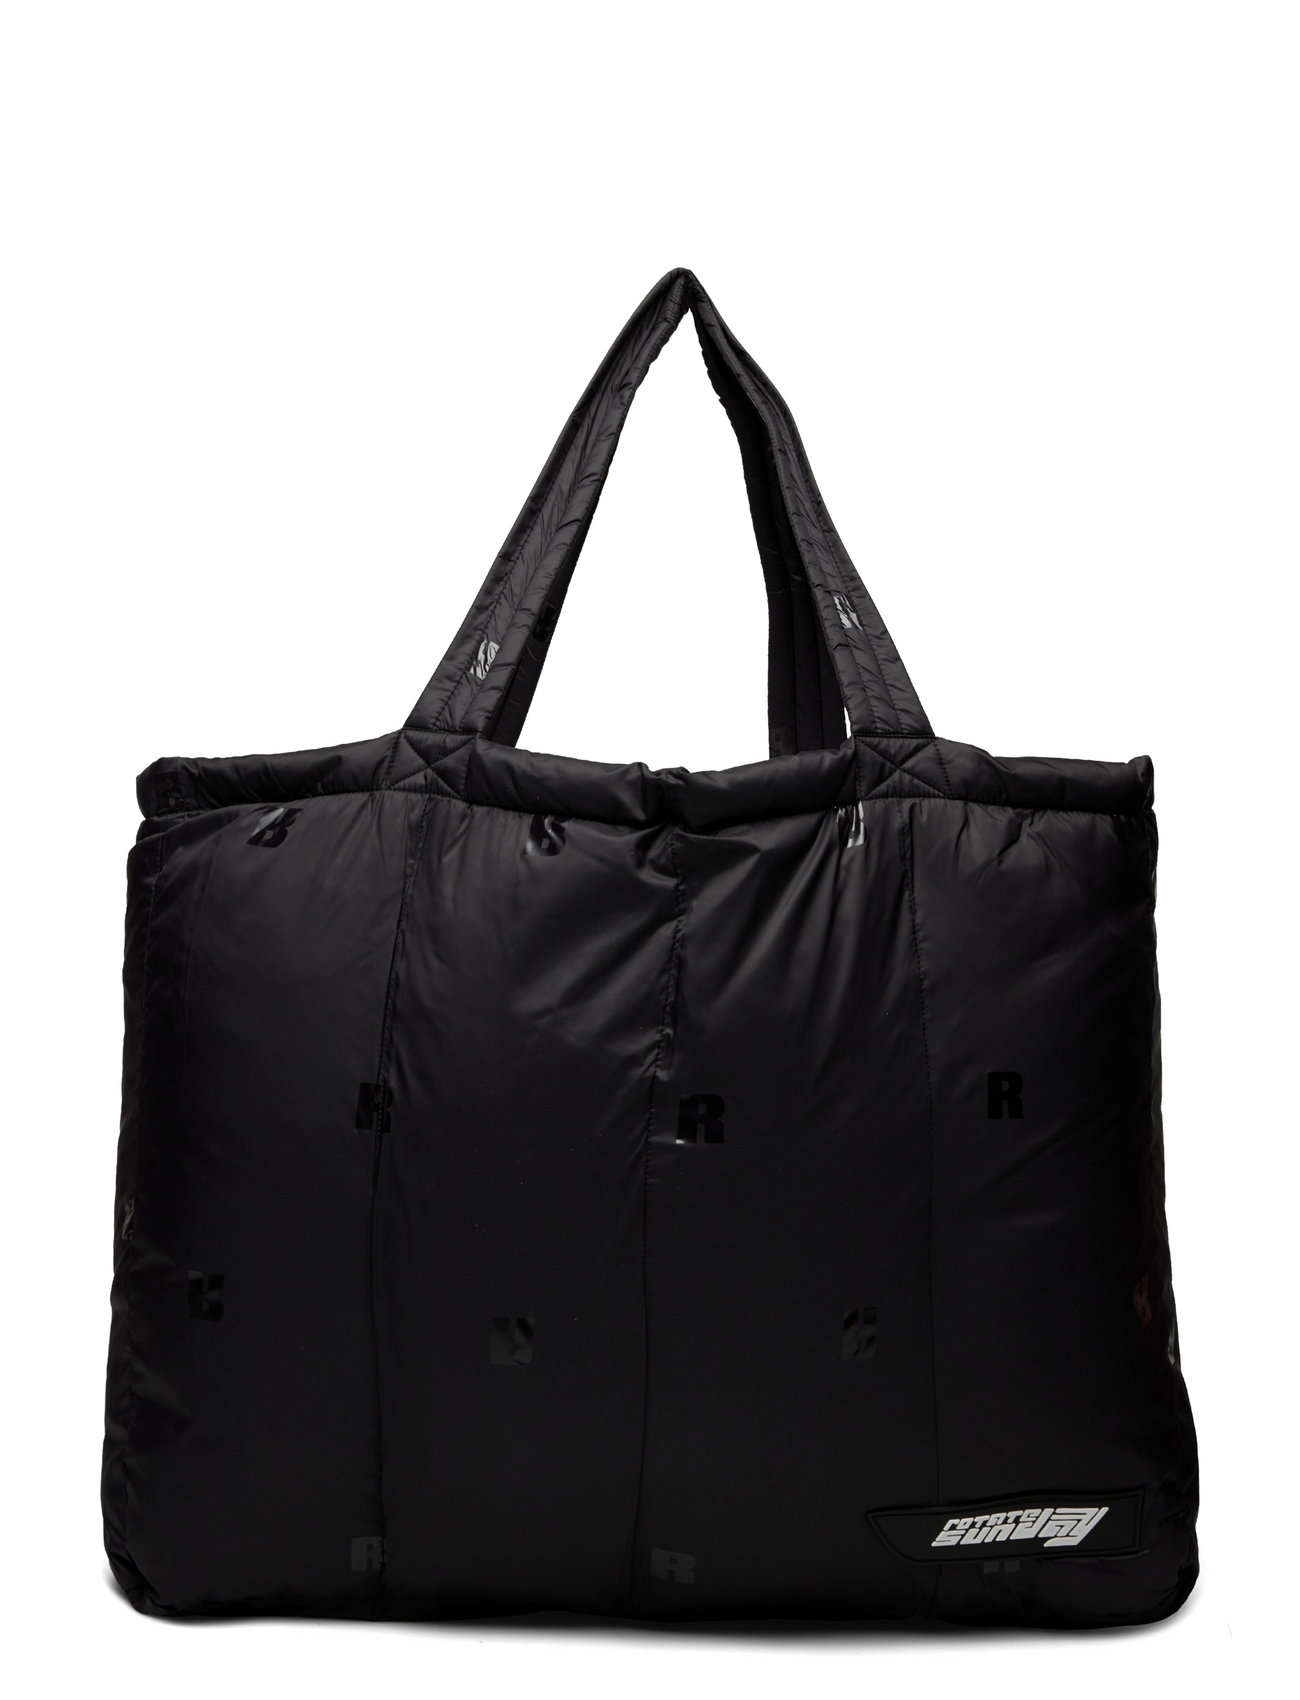 modtage miles Udvidelse ROTATE Birger Christensen Puffer Tote Bag - Shoppere & Tote Bags - Boozt.com